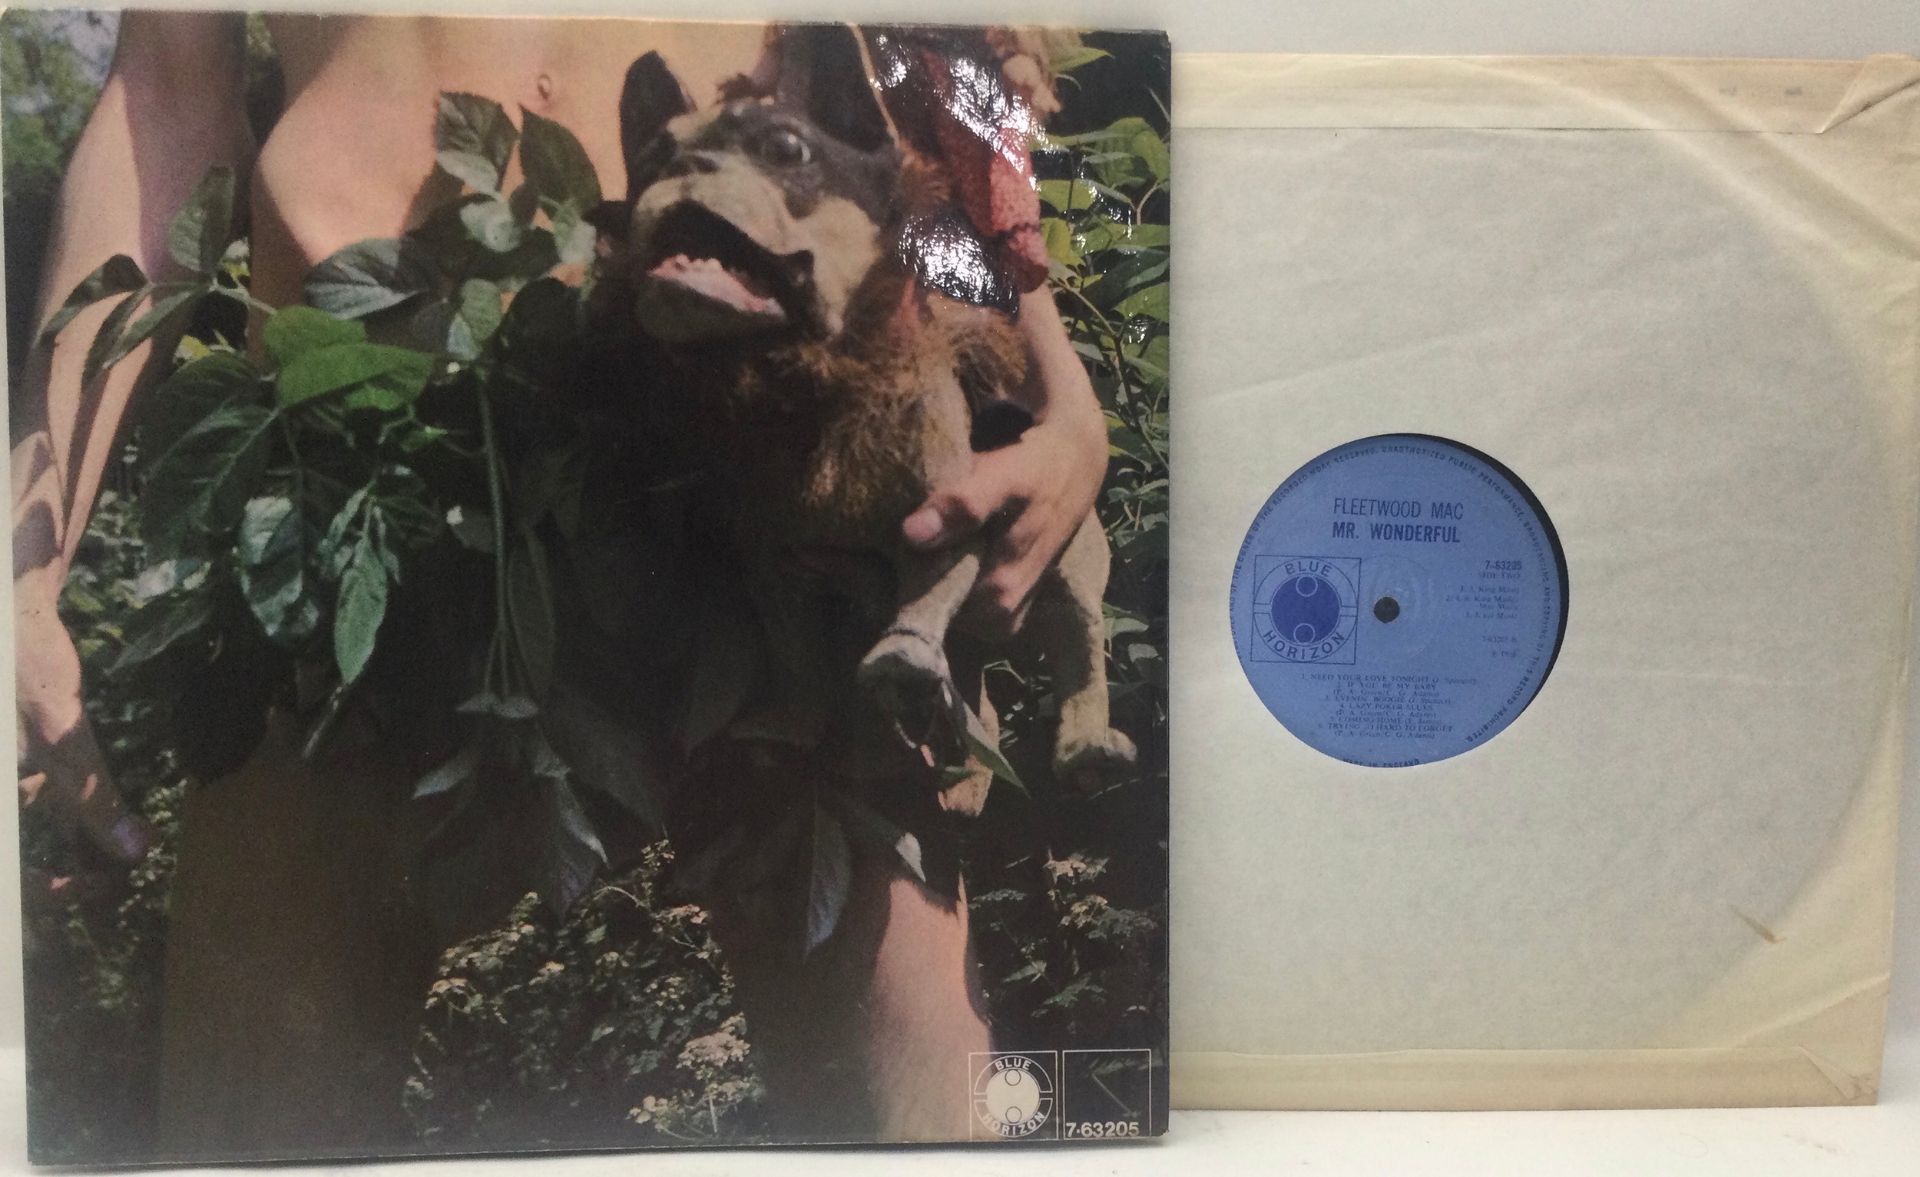 FLEETWOOD MAC VINYL LP RECORD 'MR WONDERFUL'. From 1968 we have this classic blues / rock album on - Image 2 of 4